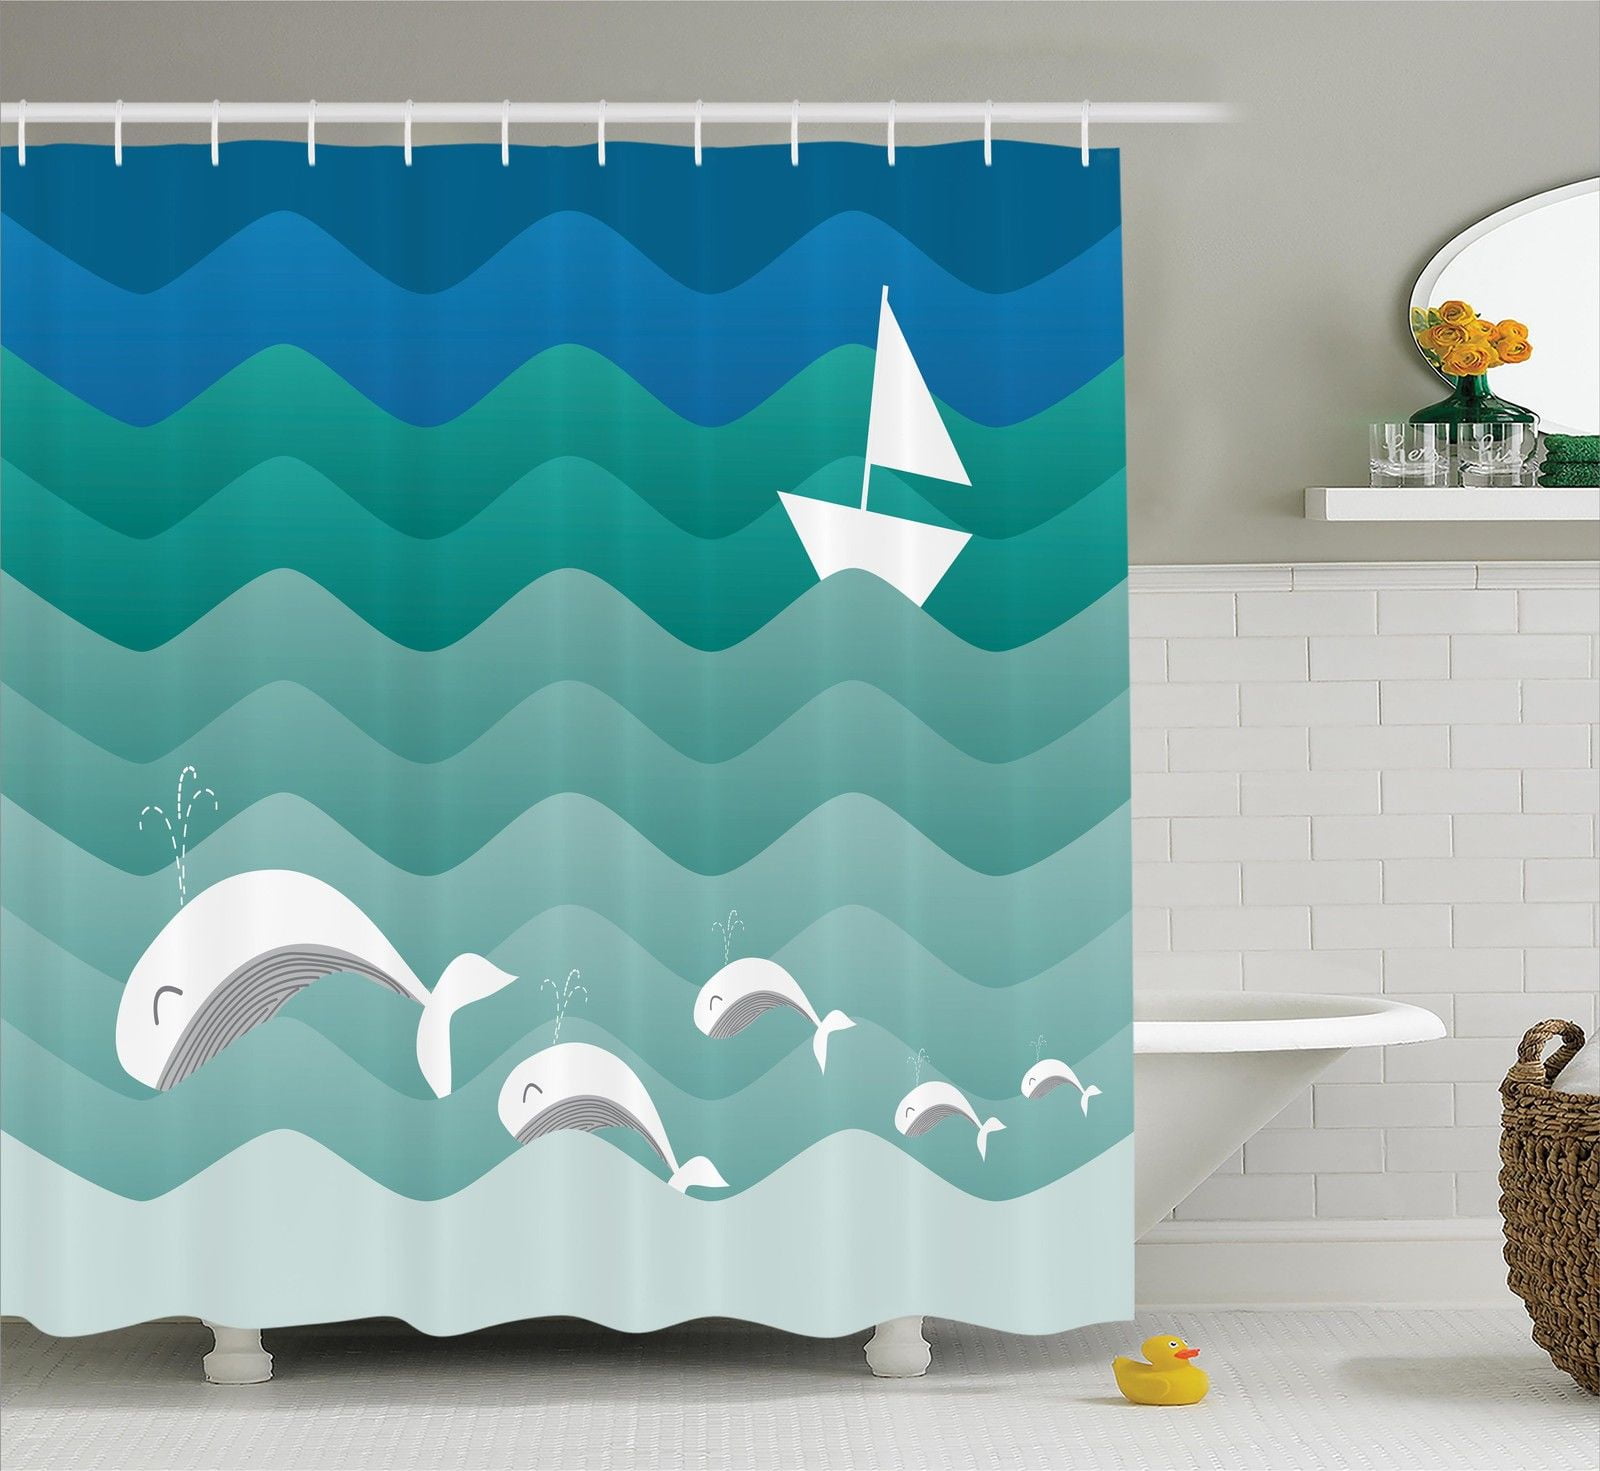 Underwater Fish Dolphins Shower Curtain Bath Accessory Sets Polyester Fabric 